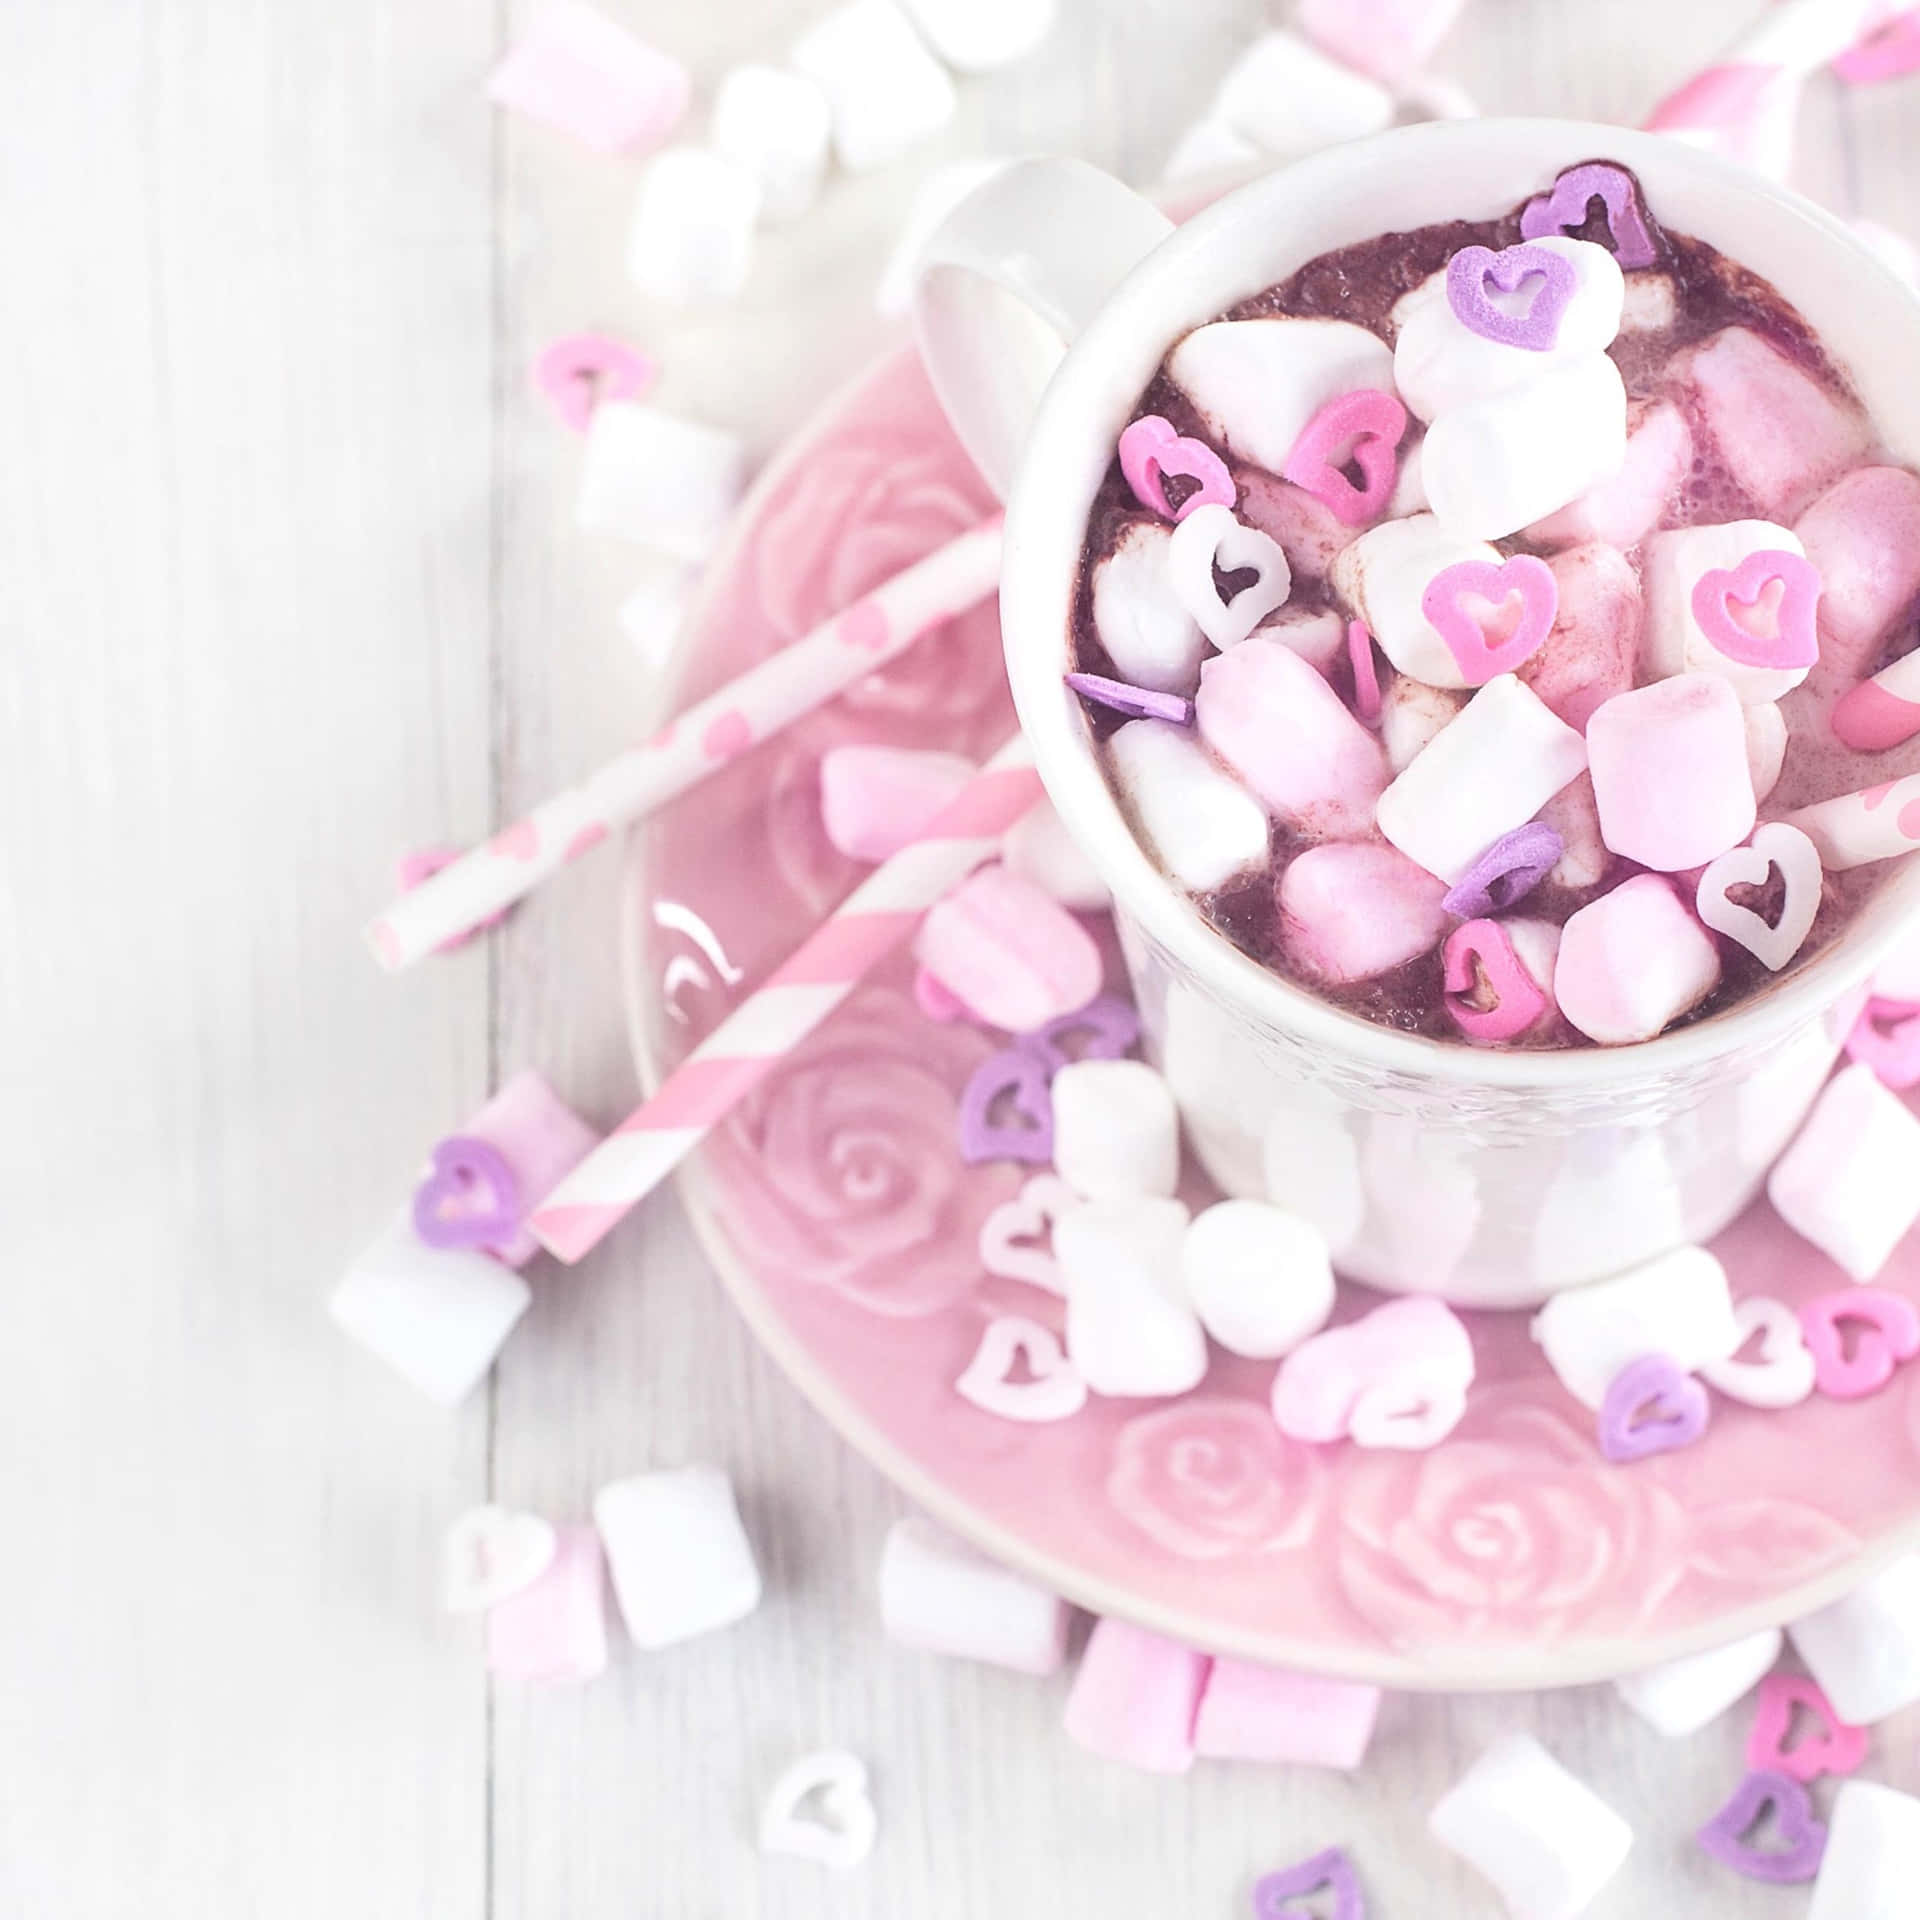 Delicious Pink Candy Swirls Wallpaper